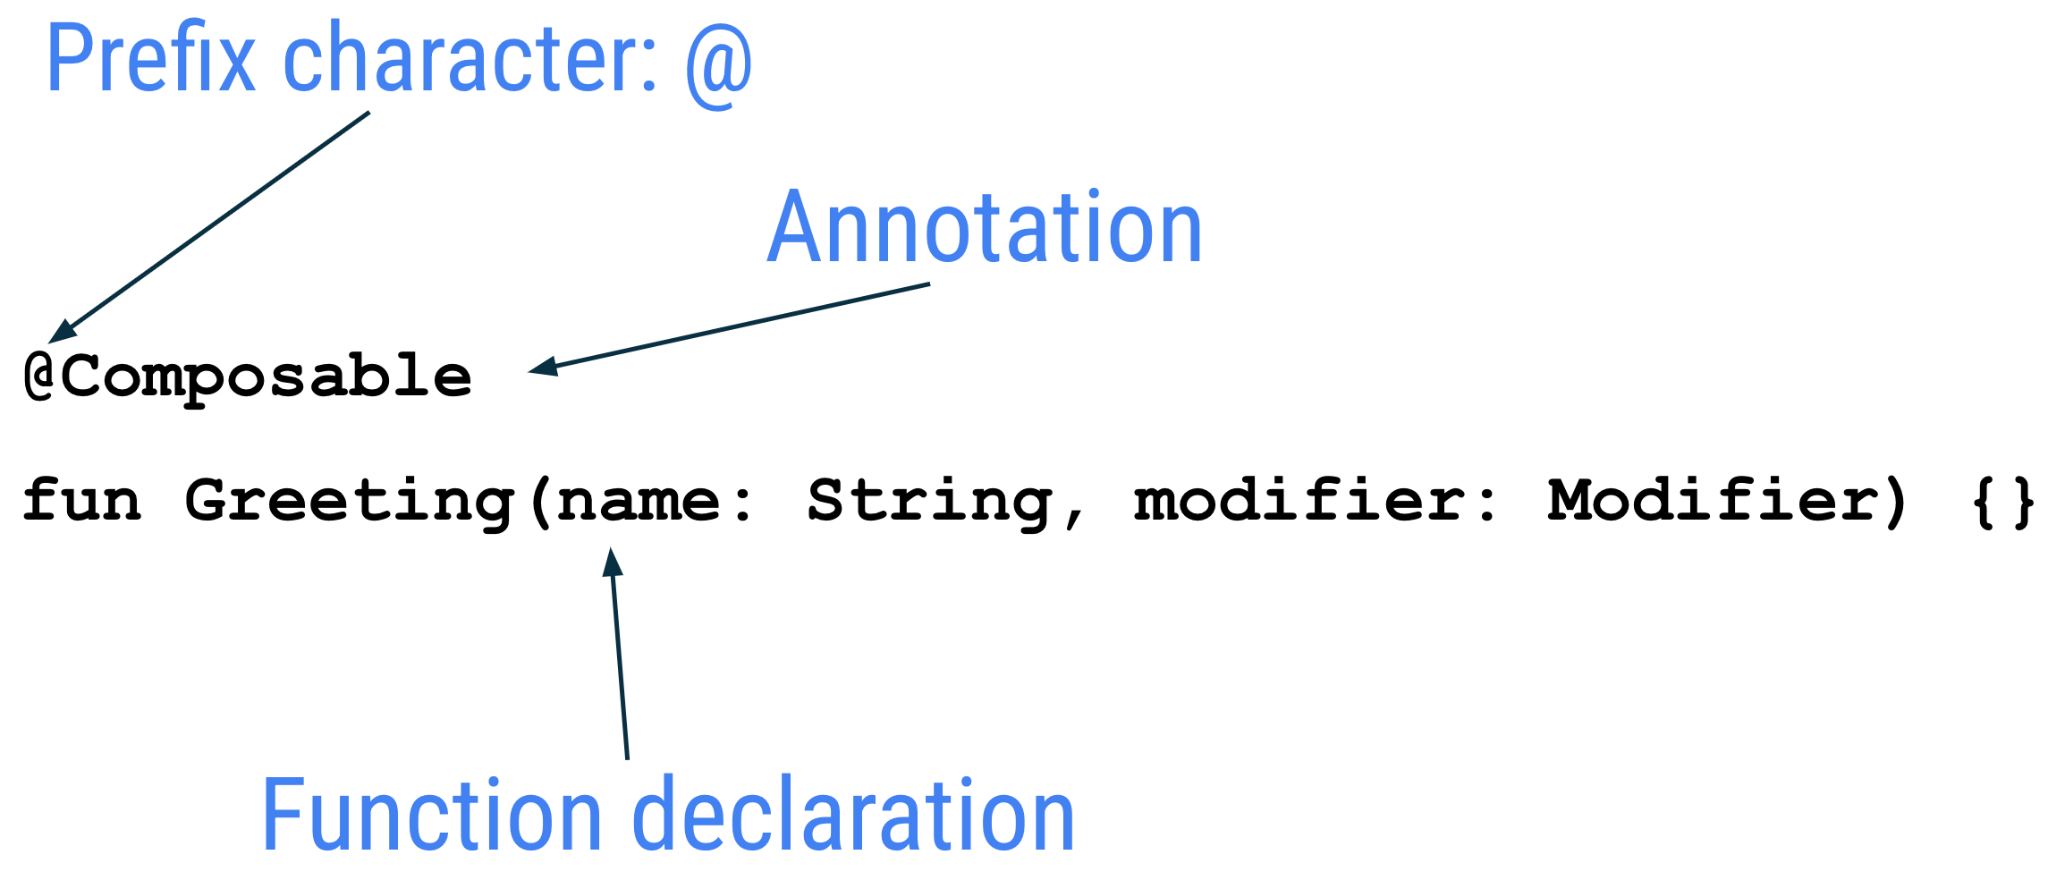 Diagram showing anatomy of a composable function where prefix character @ annotation is composable followed by the function declaration.